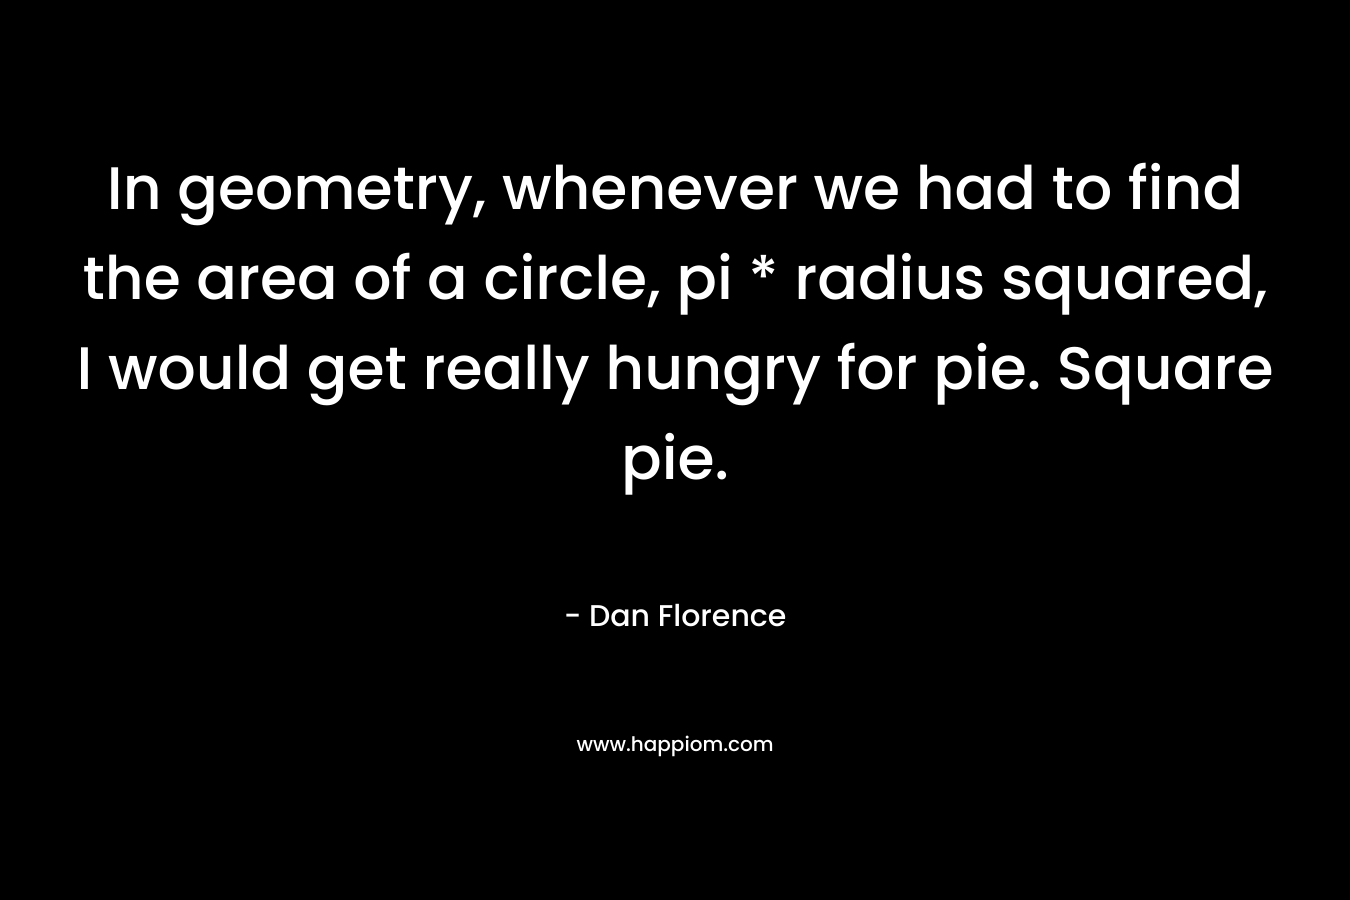 In geometry, whenever we had to find the area of a circle, pi * radius squared, I would get really hungry for pie. Square pie. – Dan Florence